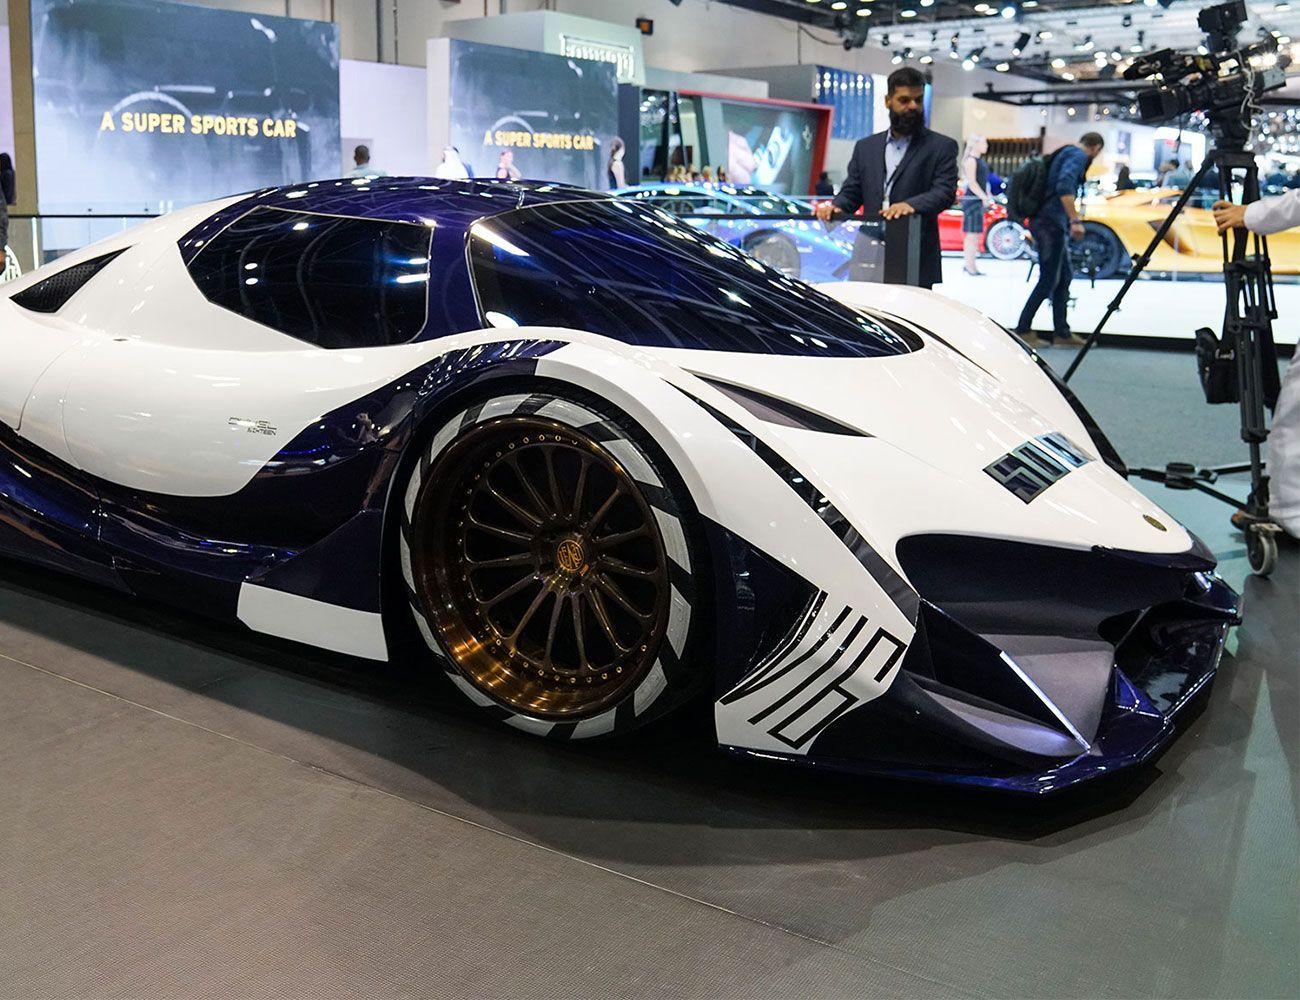 The 5 Craziest, Most Exotic Cars (Plus One Hoverbike) at the Dubai